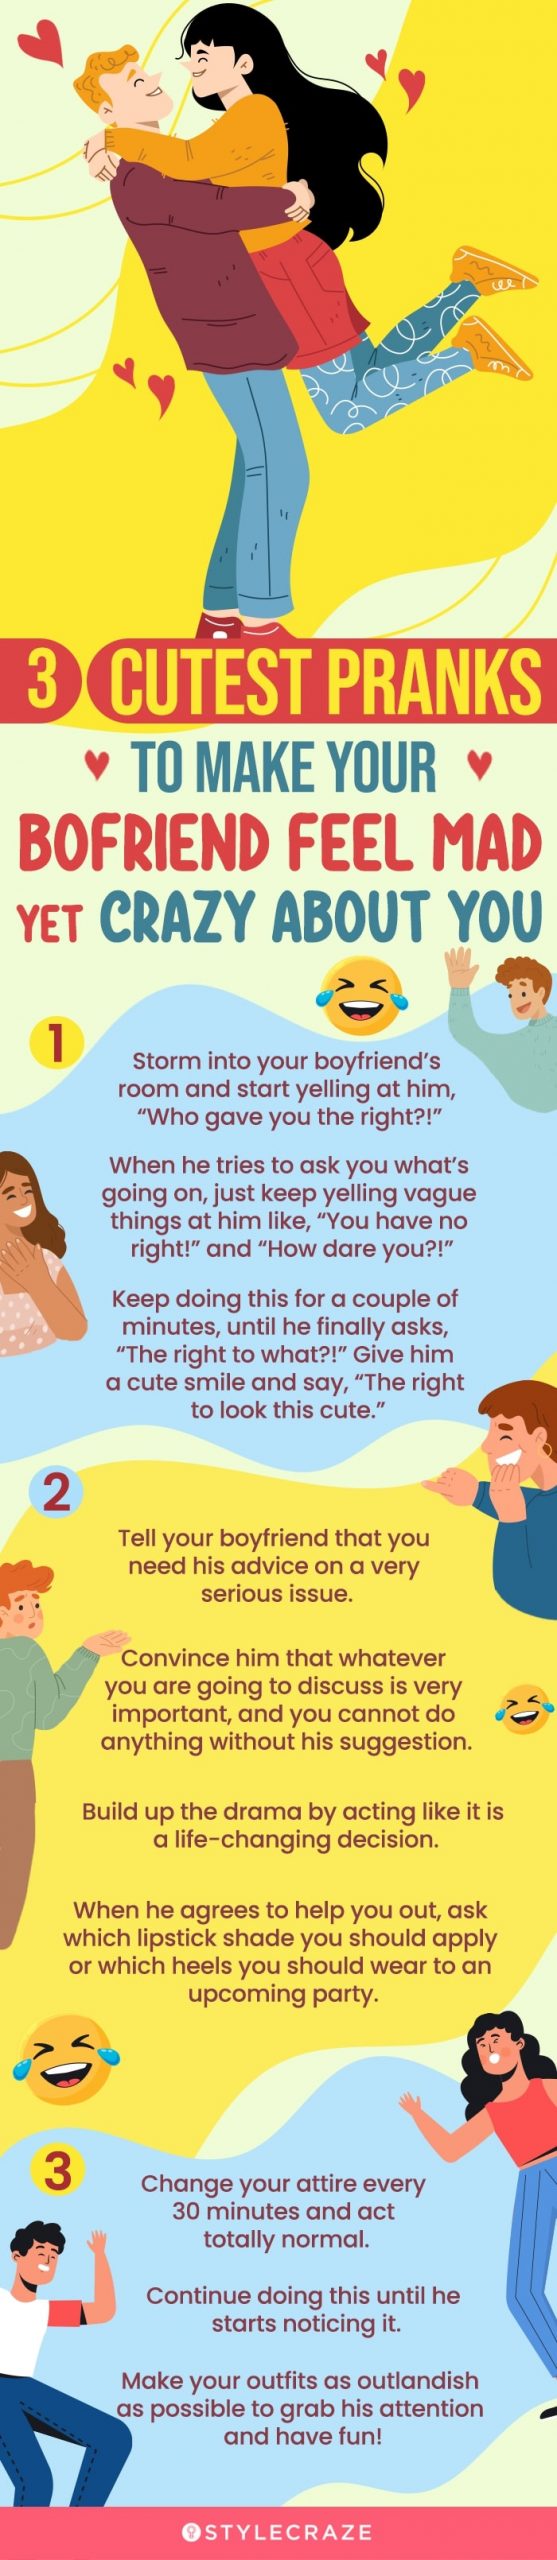 3 Cutest Pranks To Make Your Boyfriend Feel Mad Yet Crazy About You (infographic)